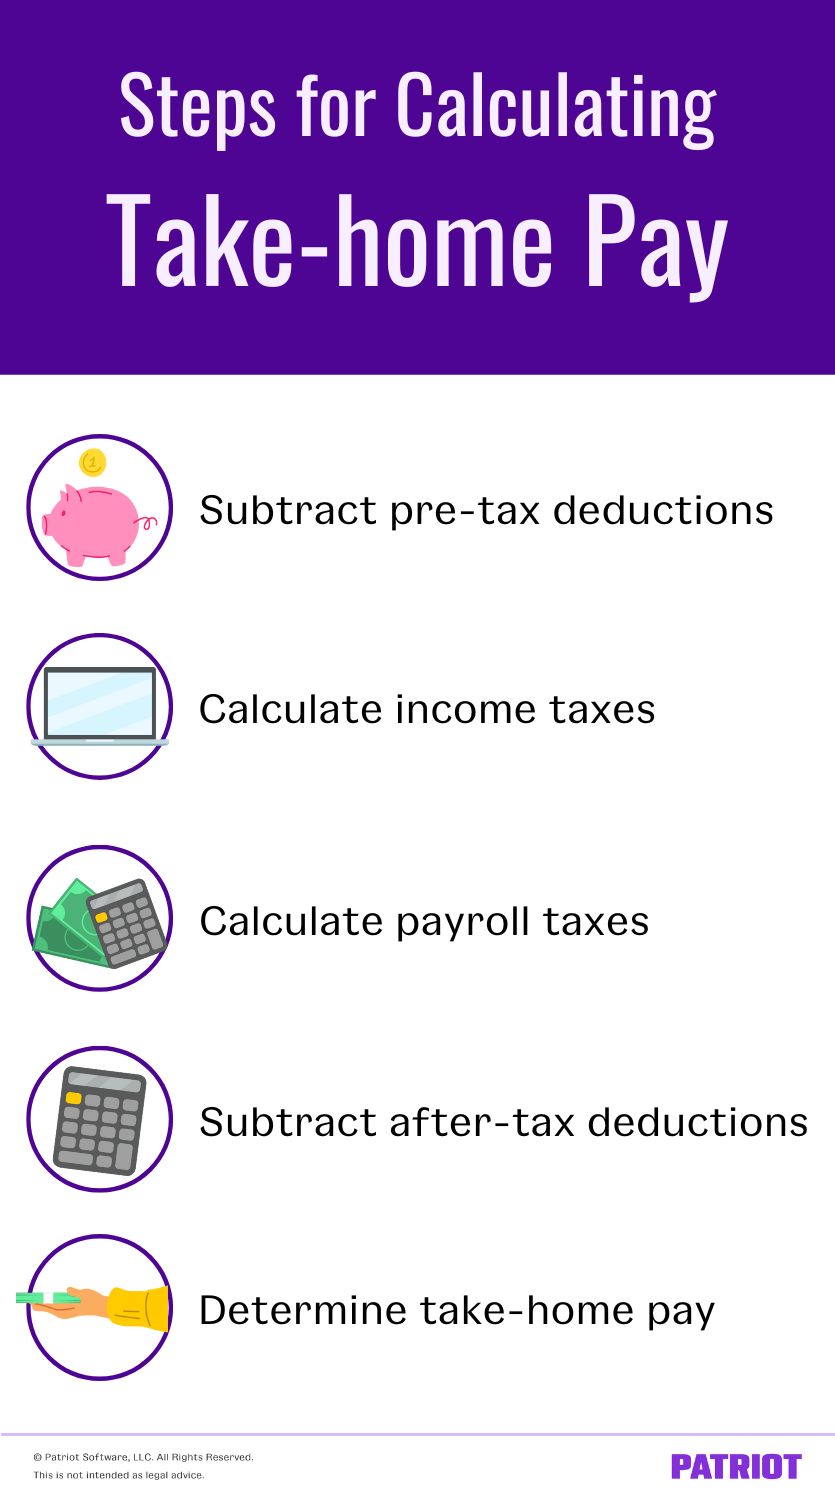 Takehome Pay Definition, Steps to Calculate, & Extra Partner for